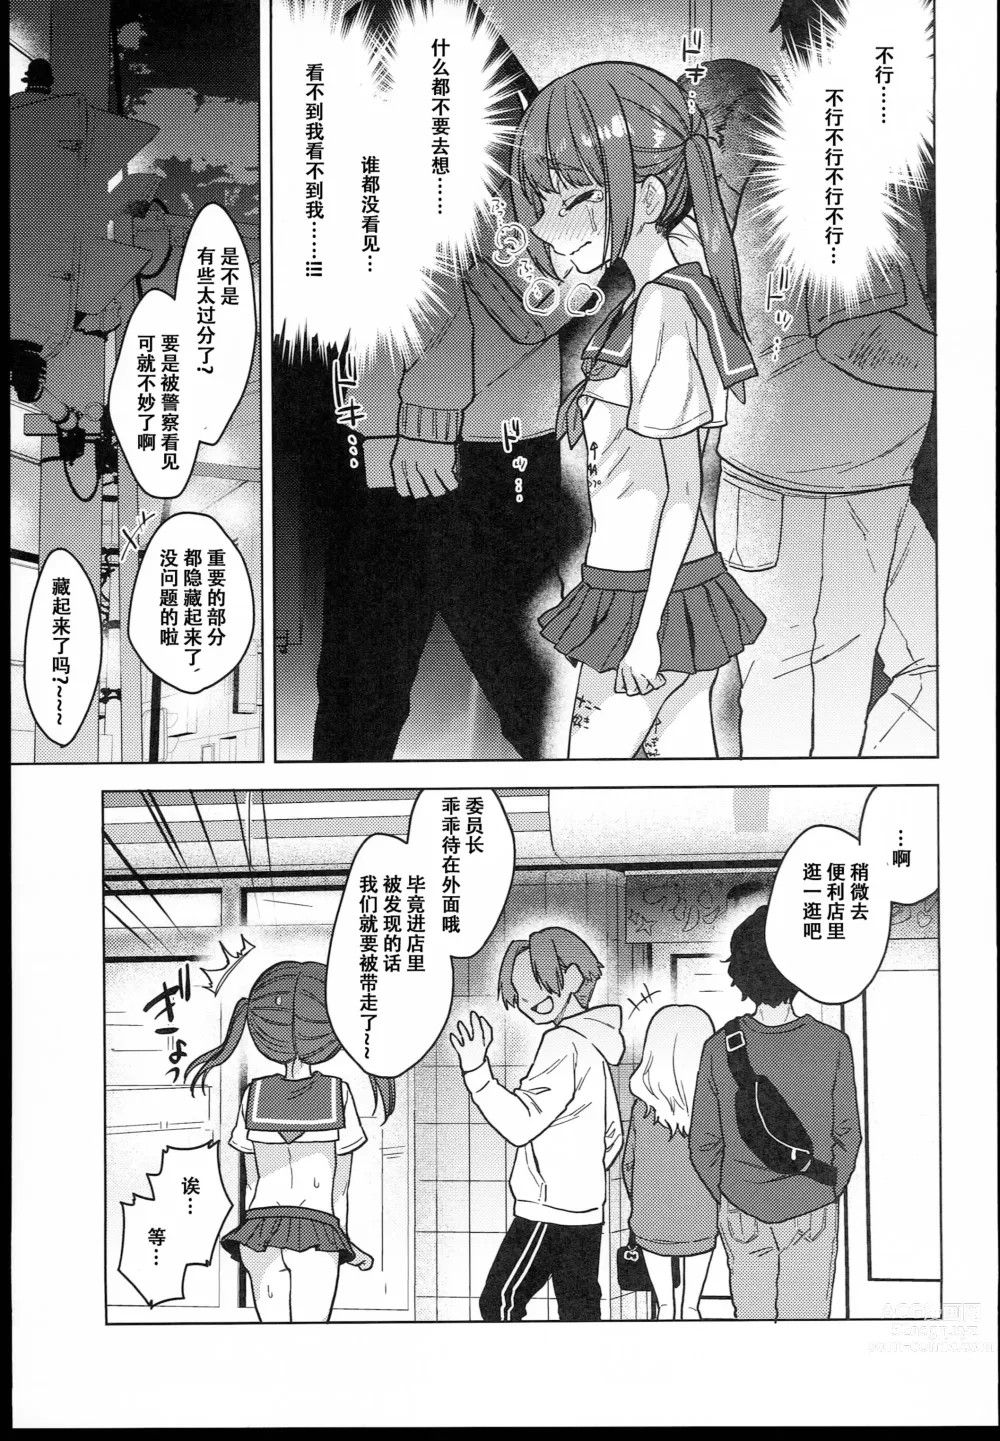 Page 17 of doujinshi 委員長は今日からみんなのオモチャ～終わった学校生活編～